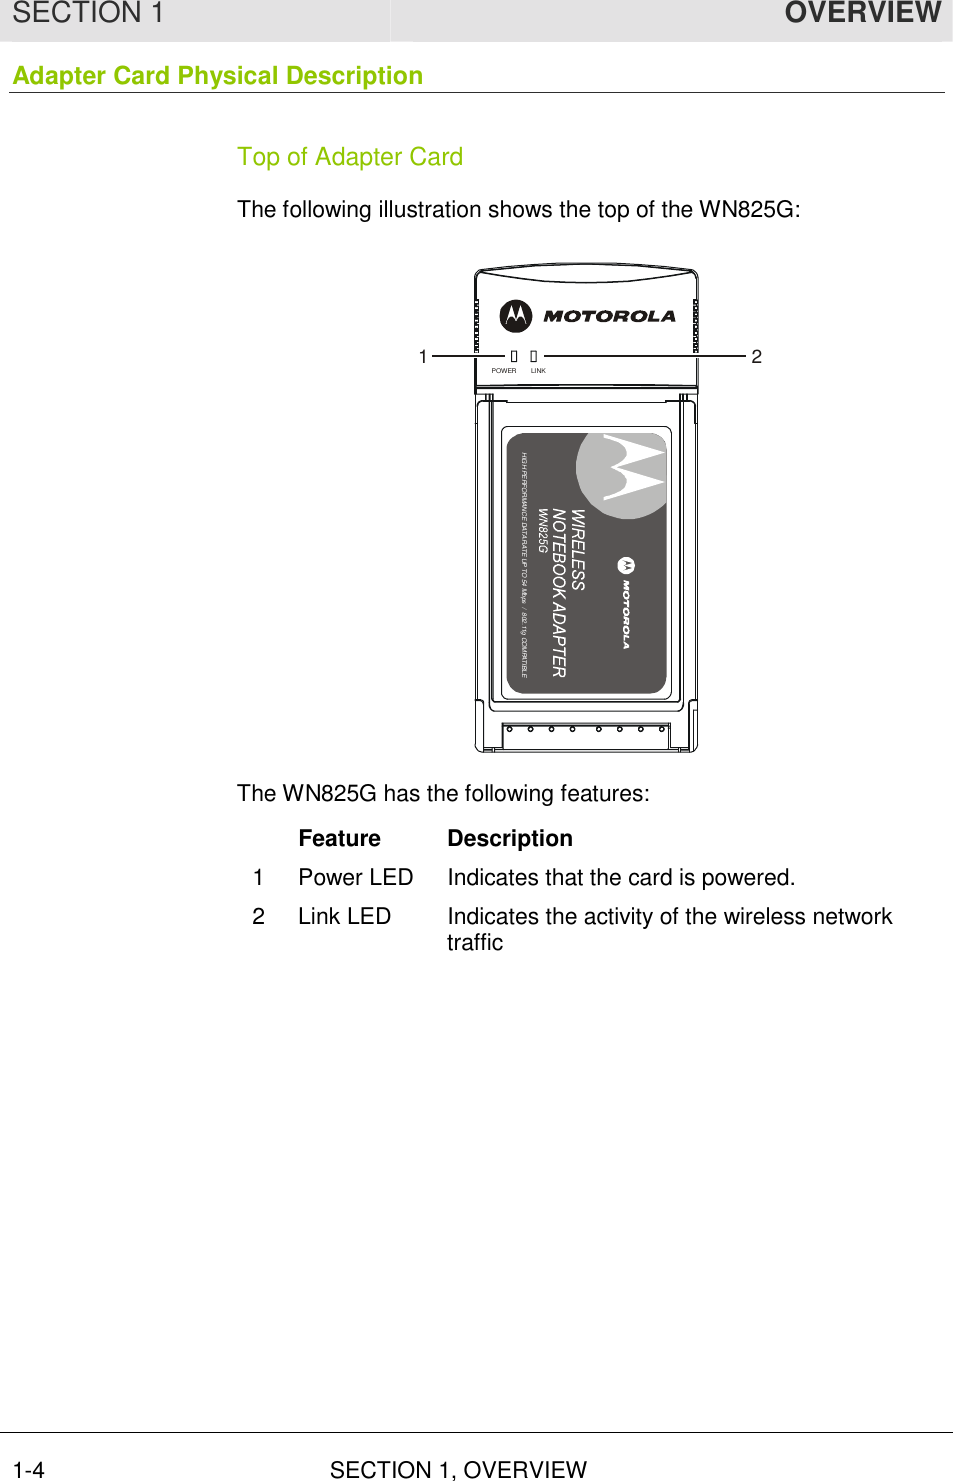 SECTION 1  OVERVIEW 1-4 SECTION 1, OVERVIEW  Adapter Card Physical Description Top of Adapter Card The following illustration shows the top of the WN825G: LINKPOWERHIGH PERFORMANCE 54 Mbits/s DATARATE/DRAFT 802.11G COMPLIANTHIGH PERFORMANCE DATA RATE UP TO 54 Mbps  /  802.11g COMPATIBLE12 The WN825G has the following features:  Feature  Description 1  Power LED  Indicates that the card is powered. 2  Link LED  Indicates the activity of the wireless network traffic 